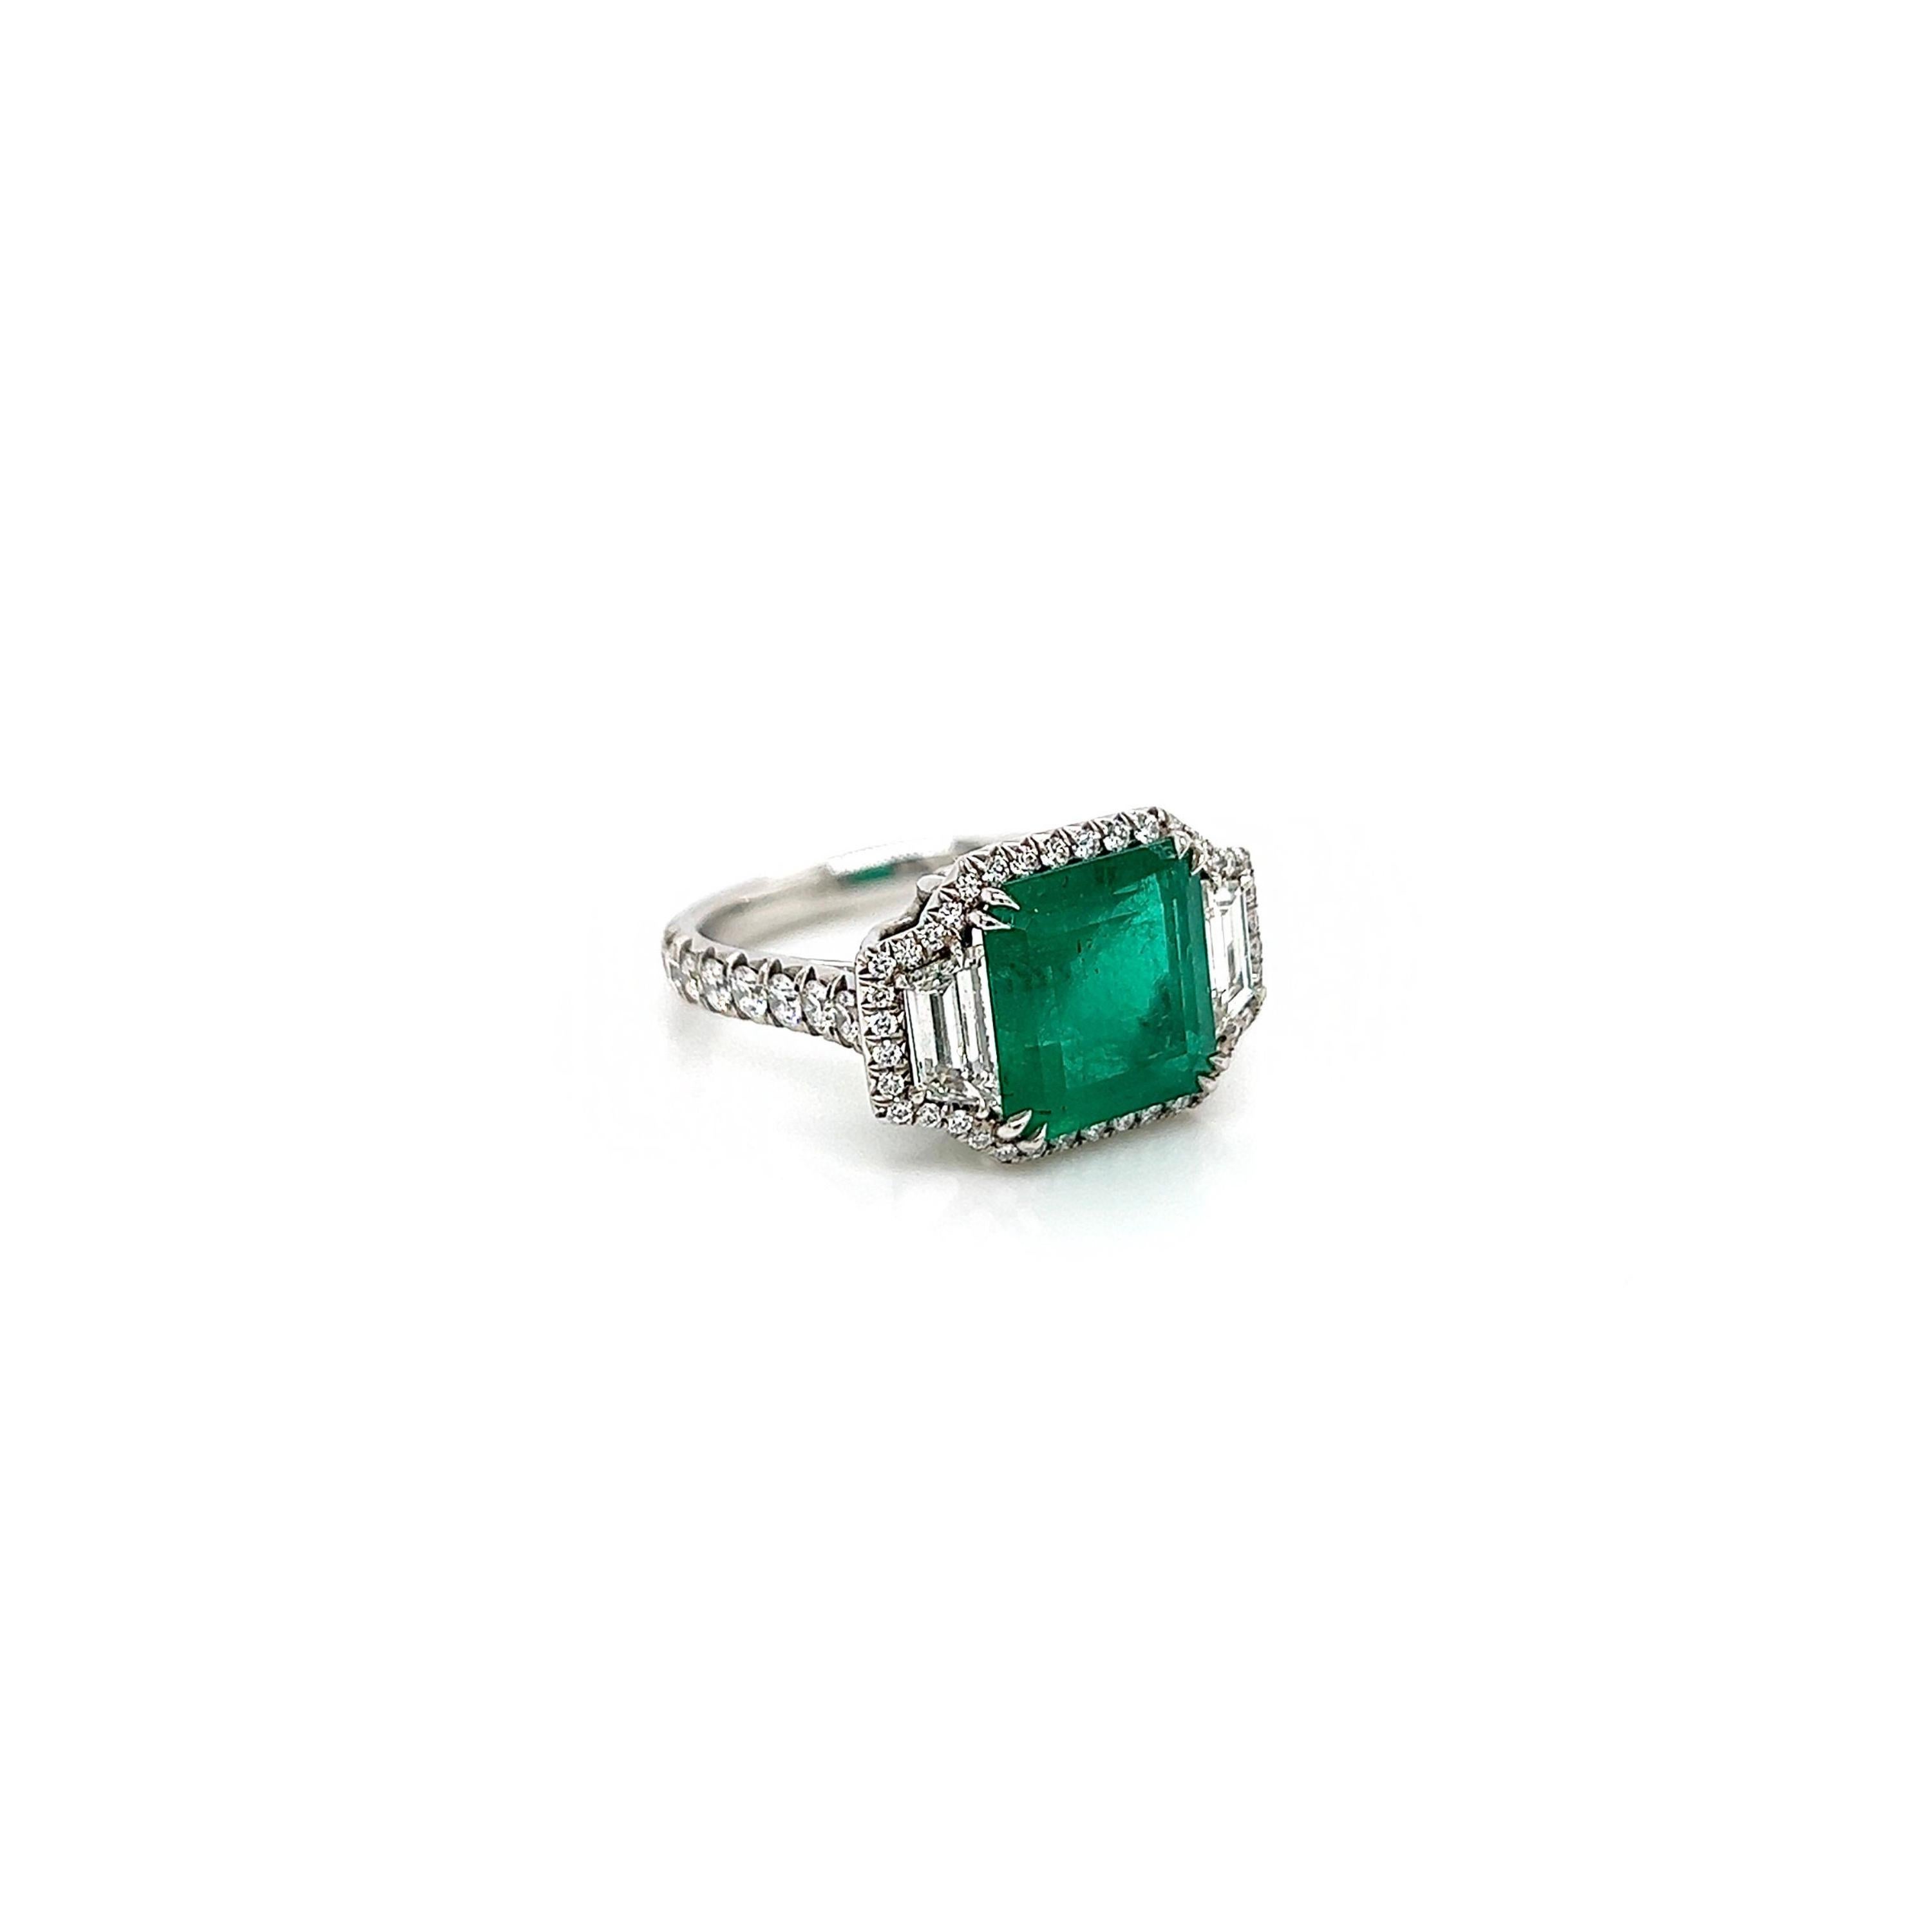 Contemporary Certified 3.91 Carat Natural Emerald Diamond Cocktail Ring Unique Diamond Ring For Sale